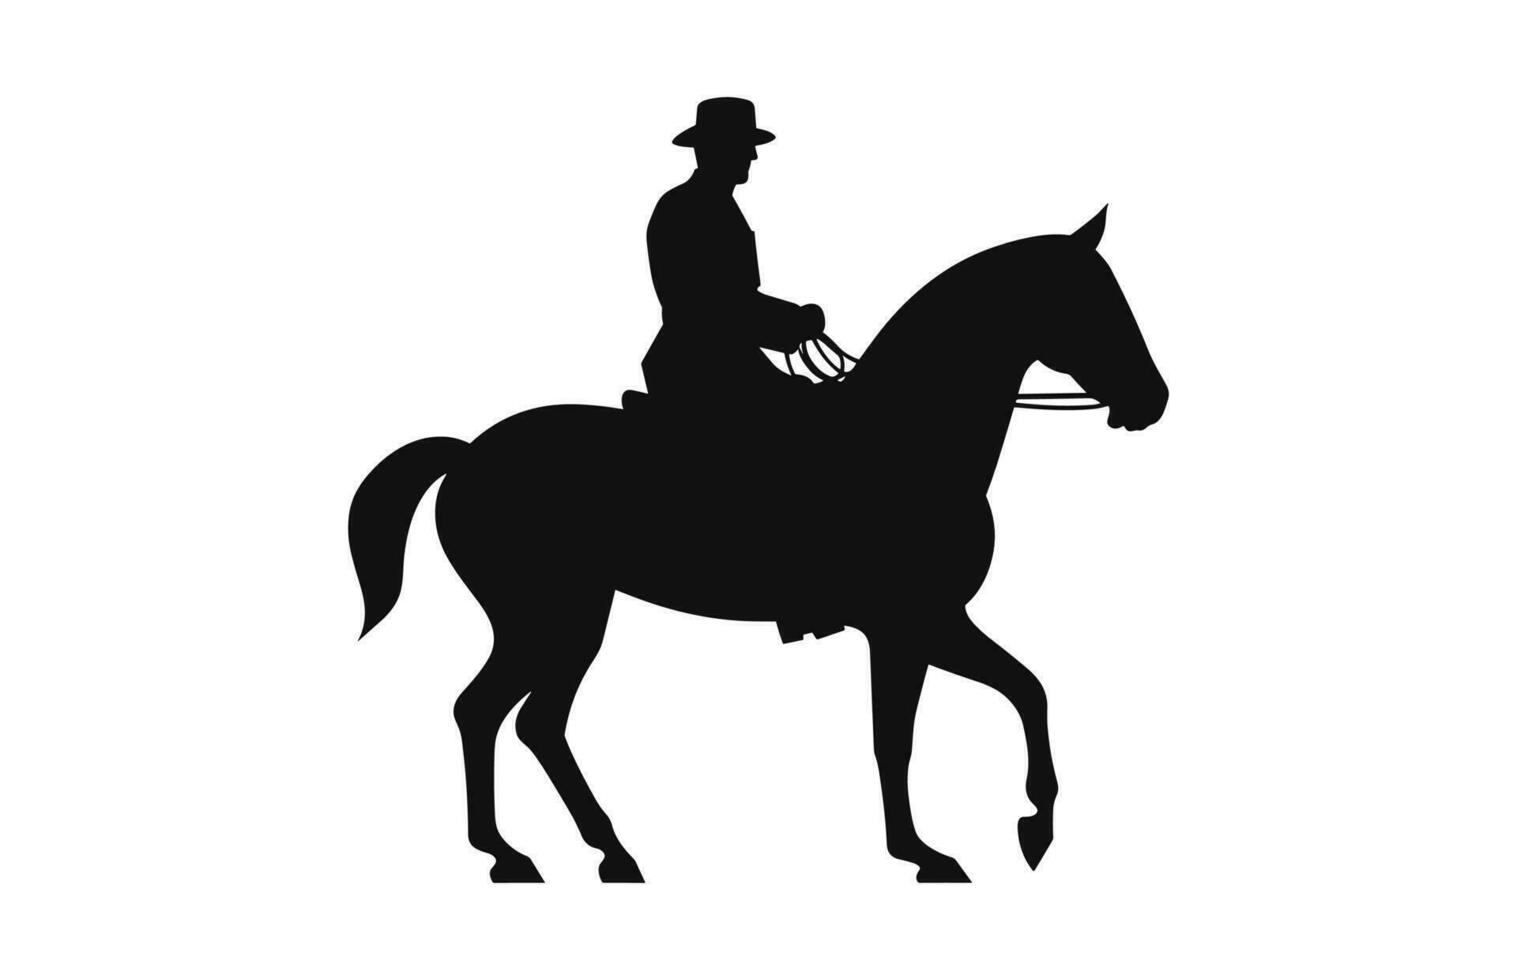 A Cavalry black Silhouette isolated on a white background vector